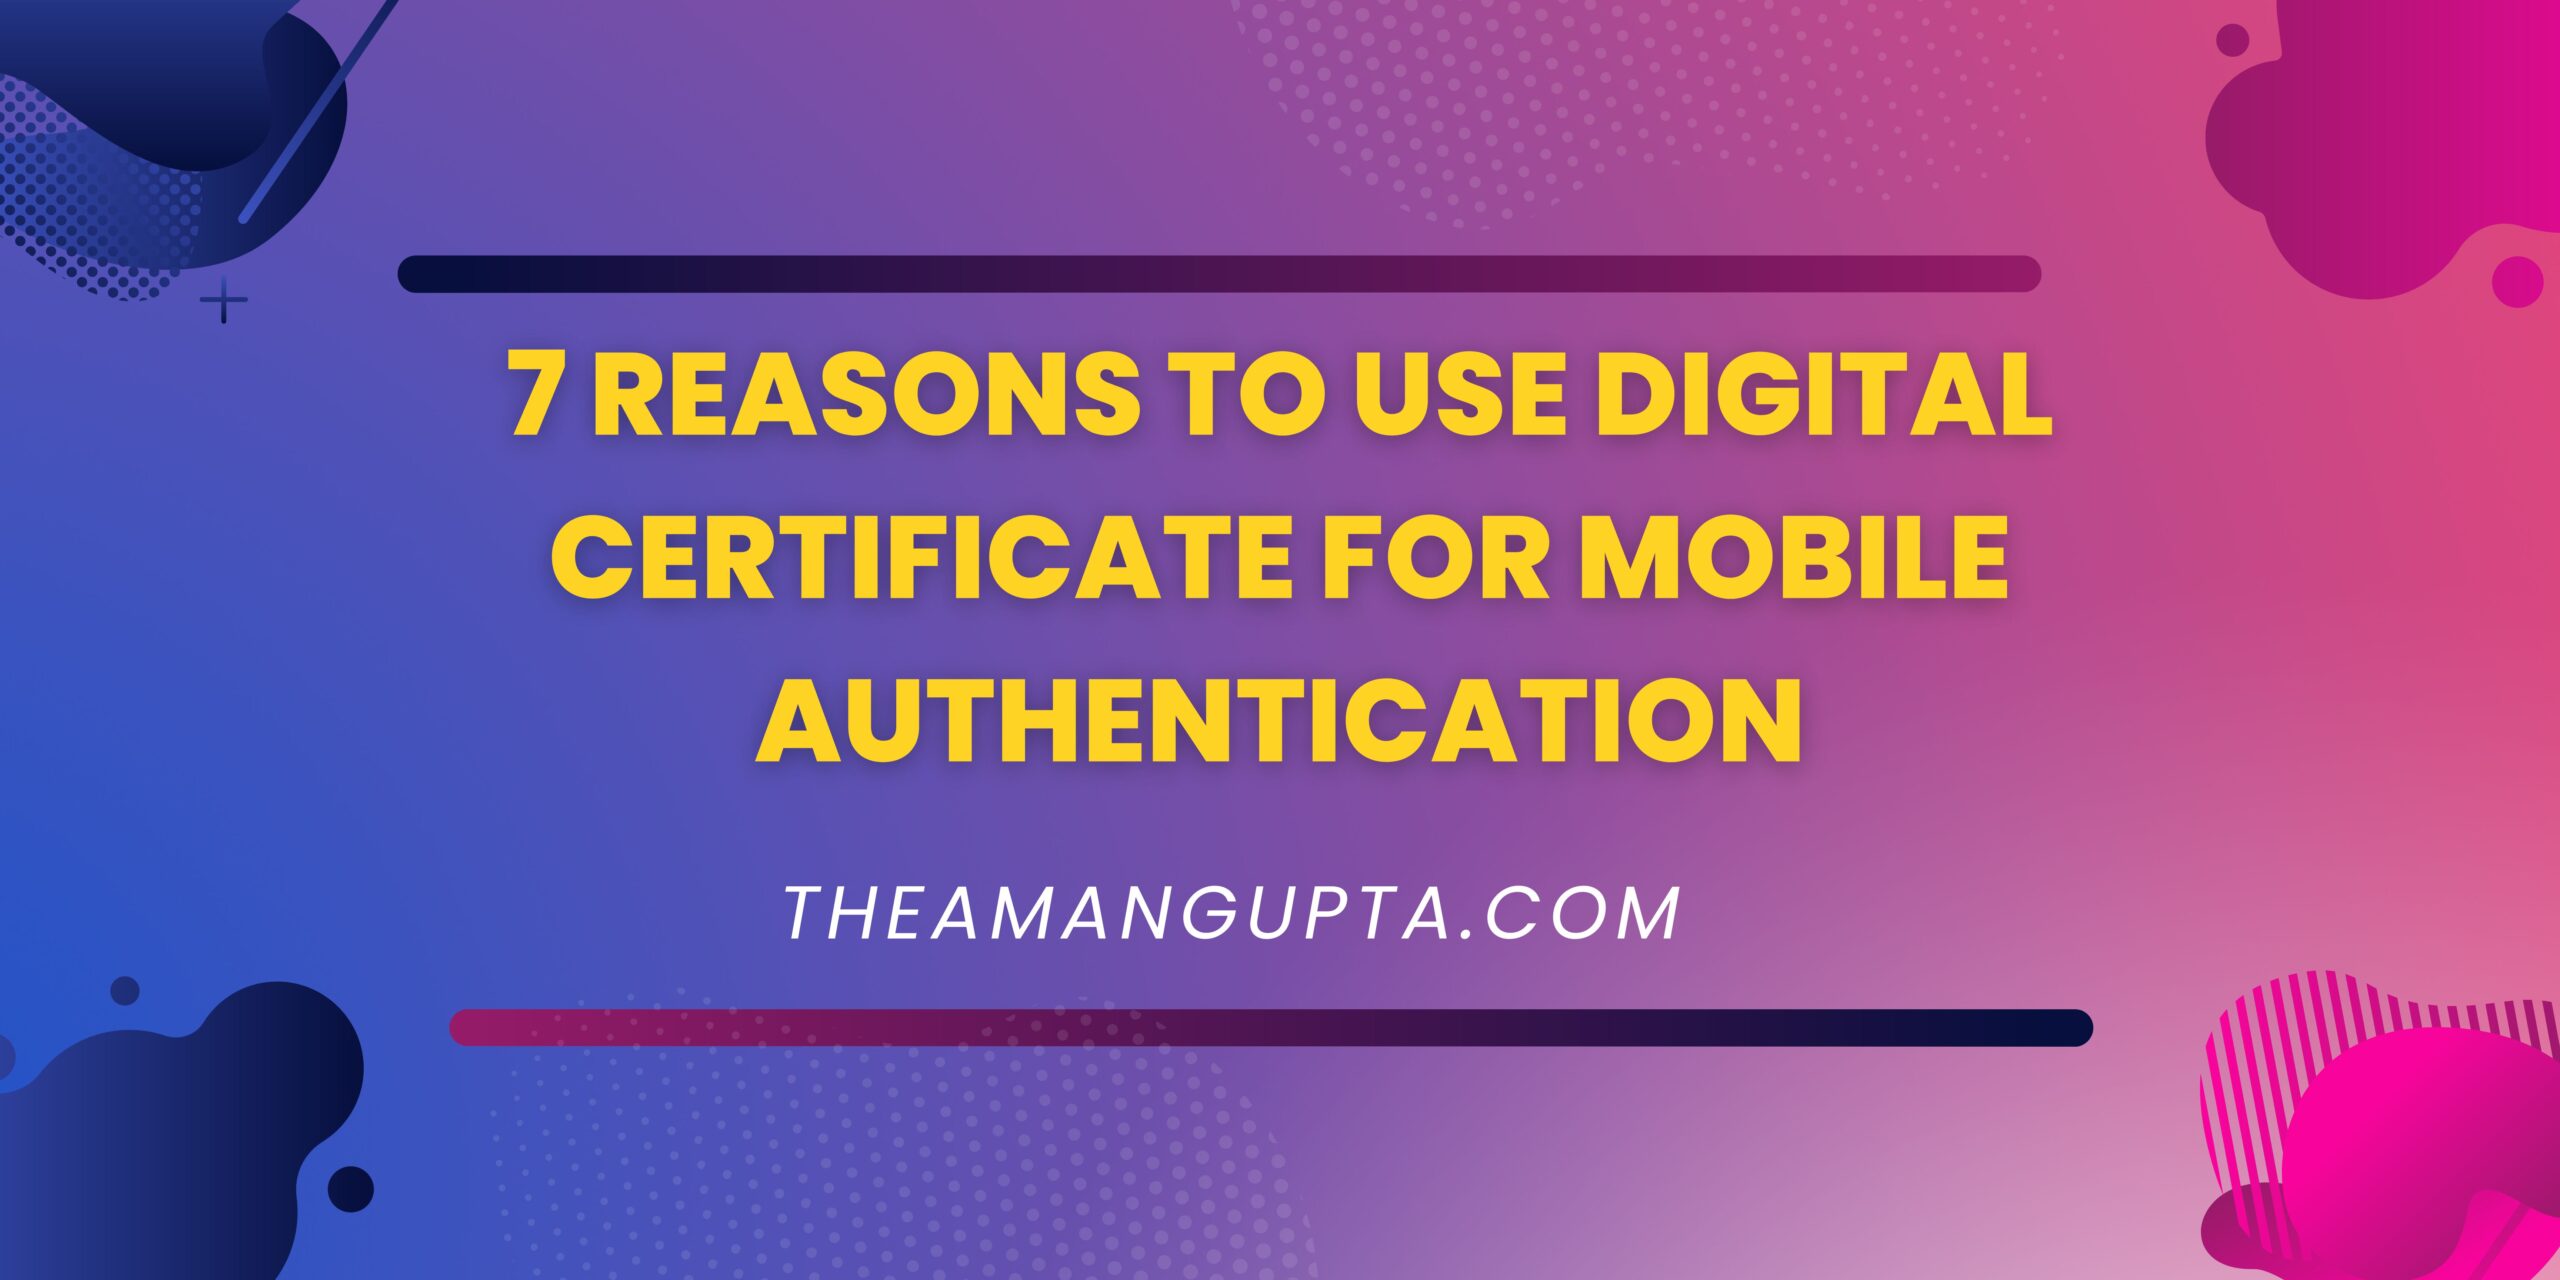 7 Reasons To Use Digital Certificate For Mobile Authentication|Mobile Authentication|Theamangupta